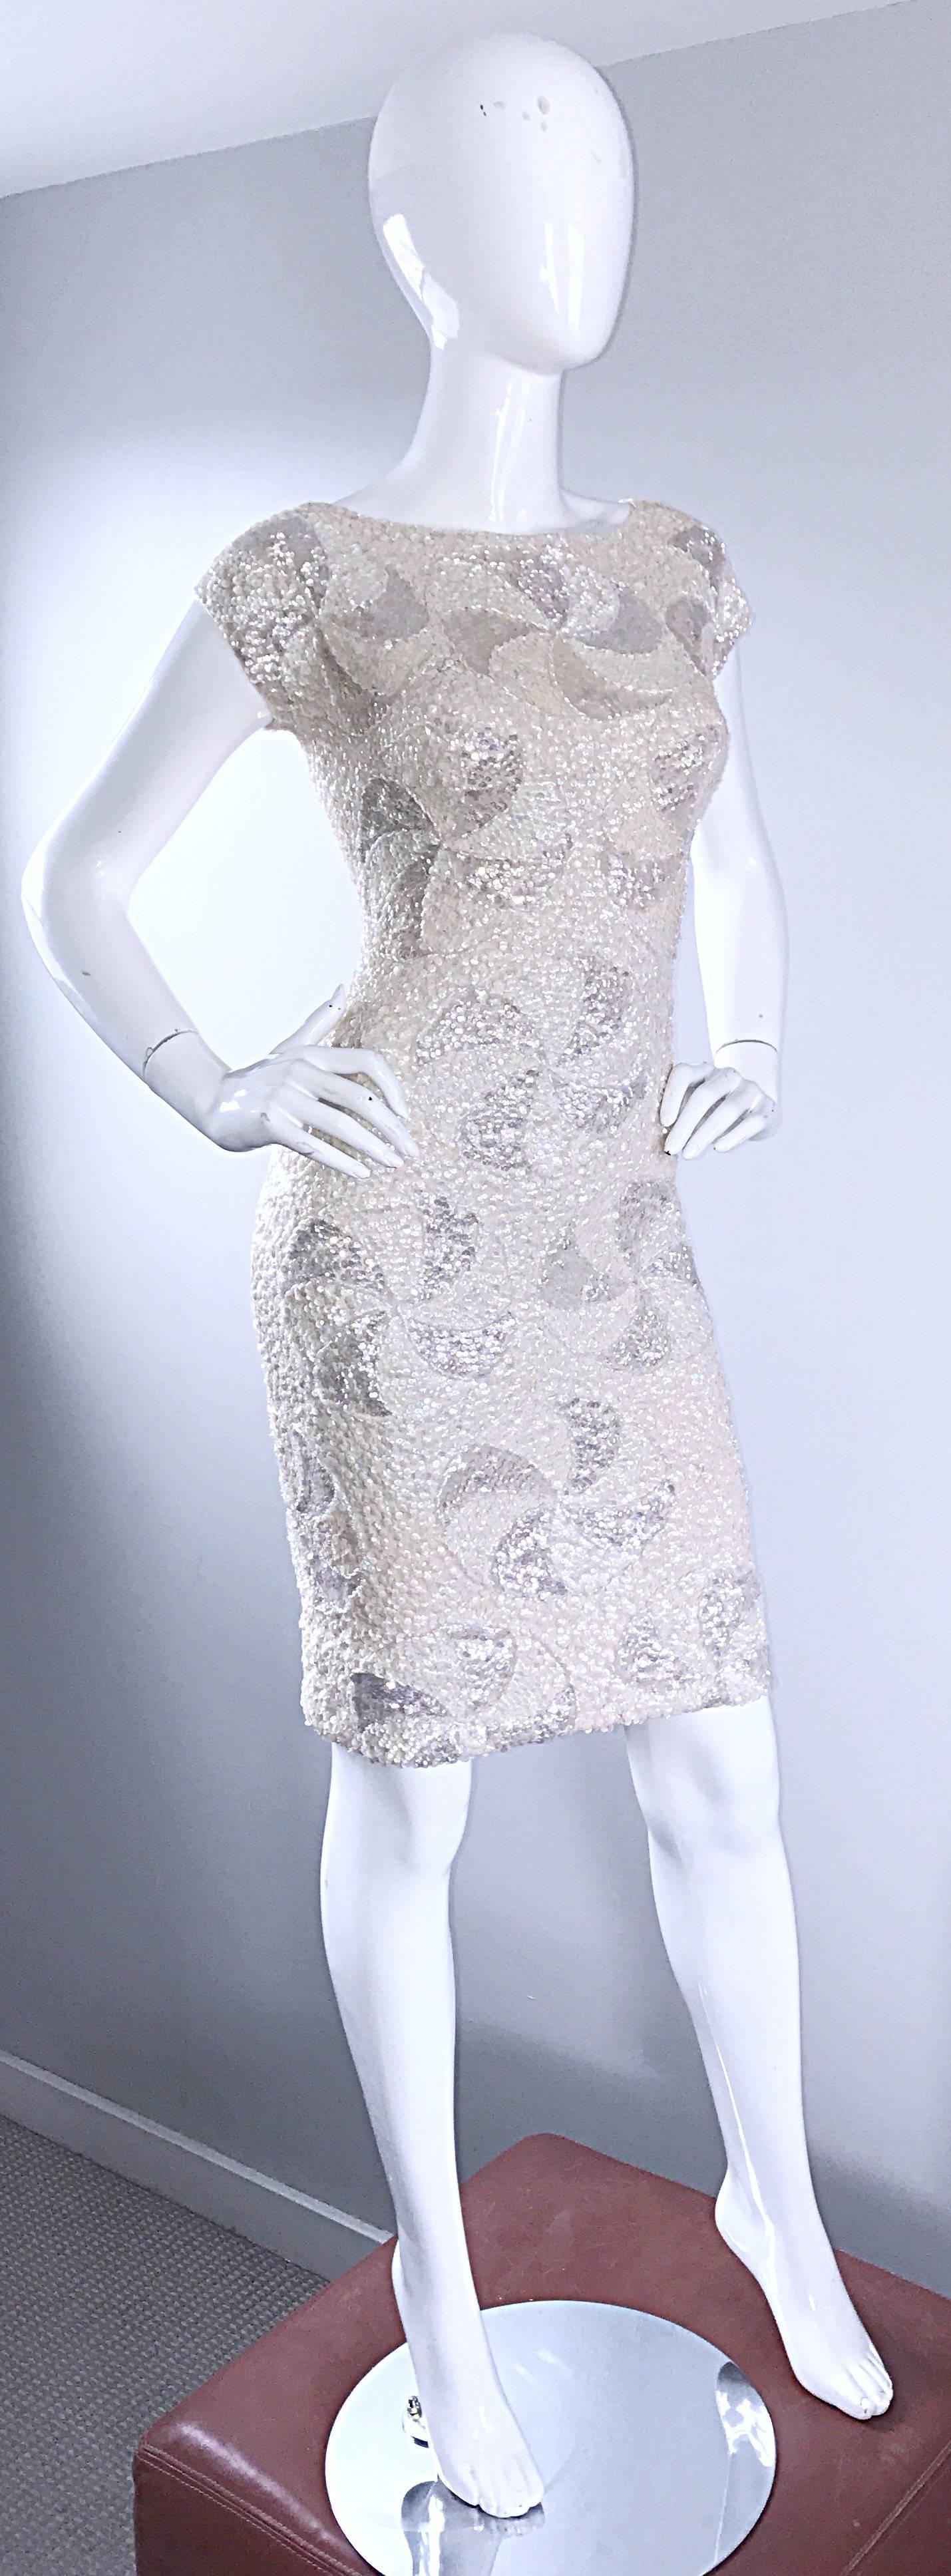 Gene Shelly Ivory White Wool Knit Fully Sequined Vintage Wiggle Dress, 1950s  2